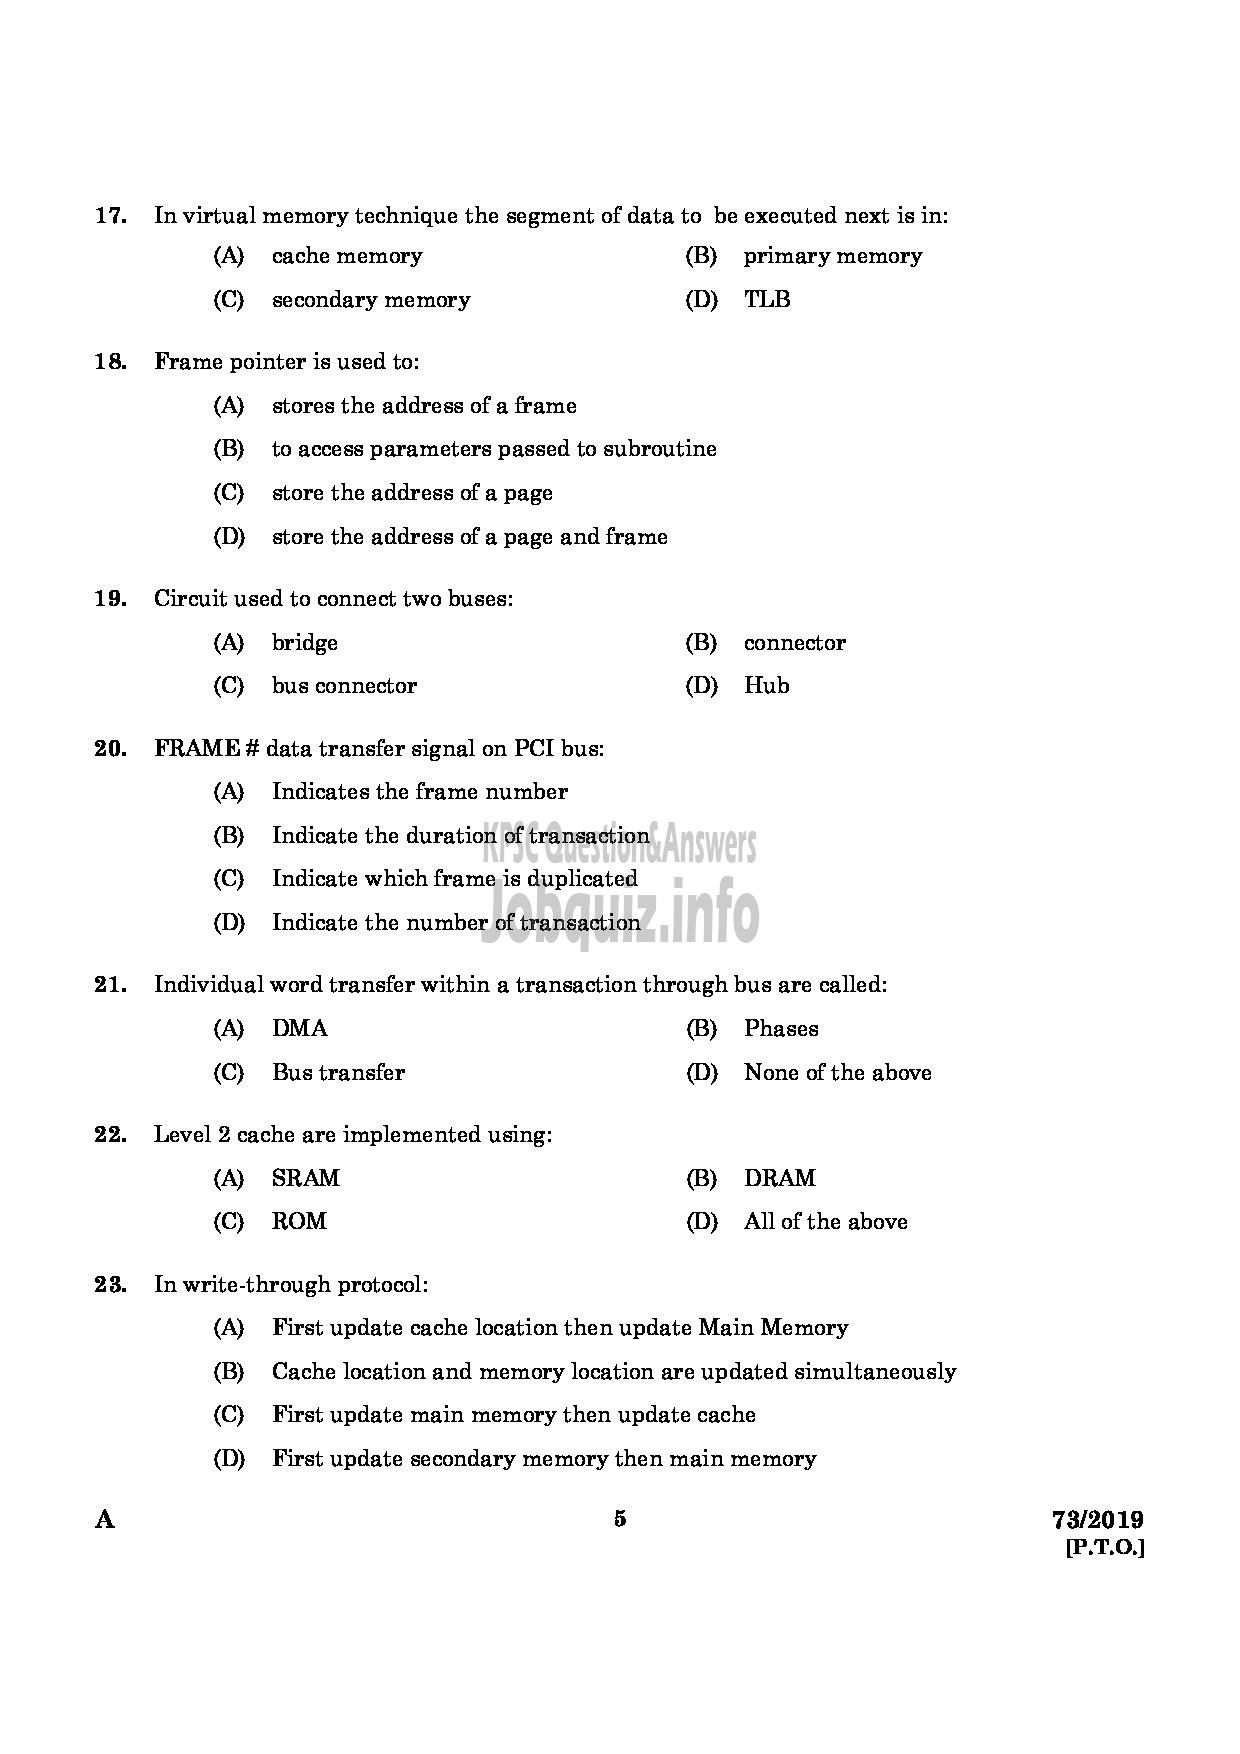 Kerala PSC Question Paper - Junior Instructor (Multimedia Animation And Special Effects) In Industrial Deve Dept English -3